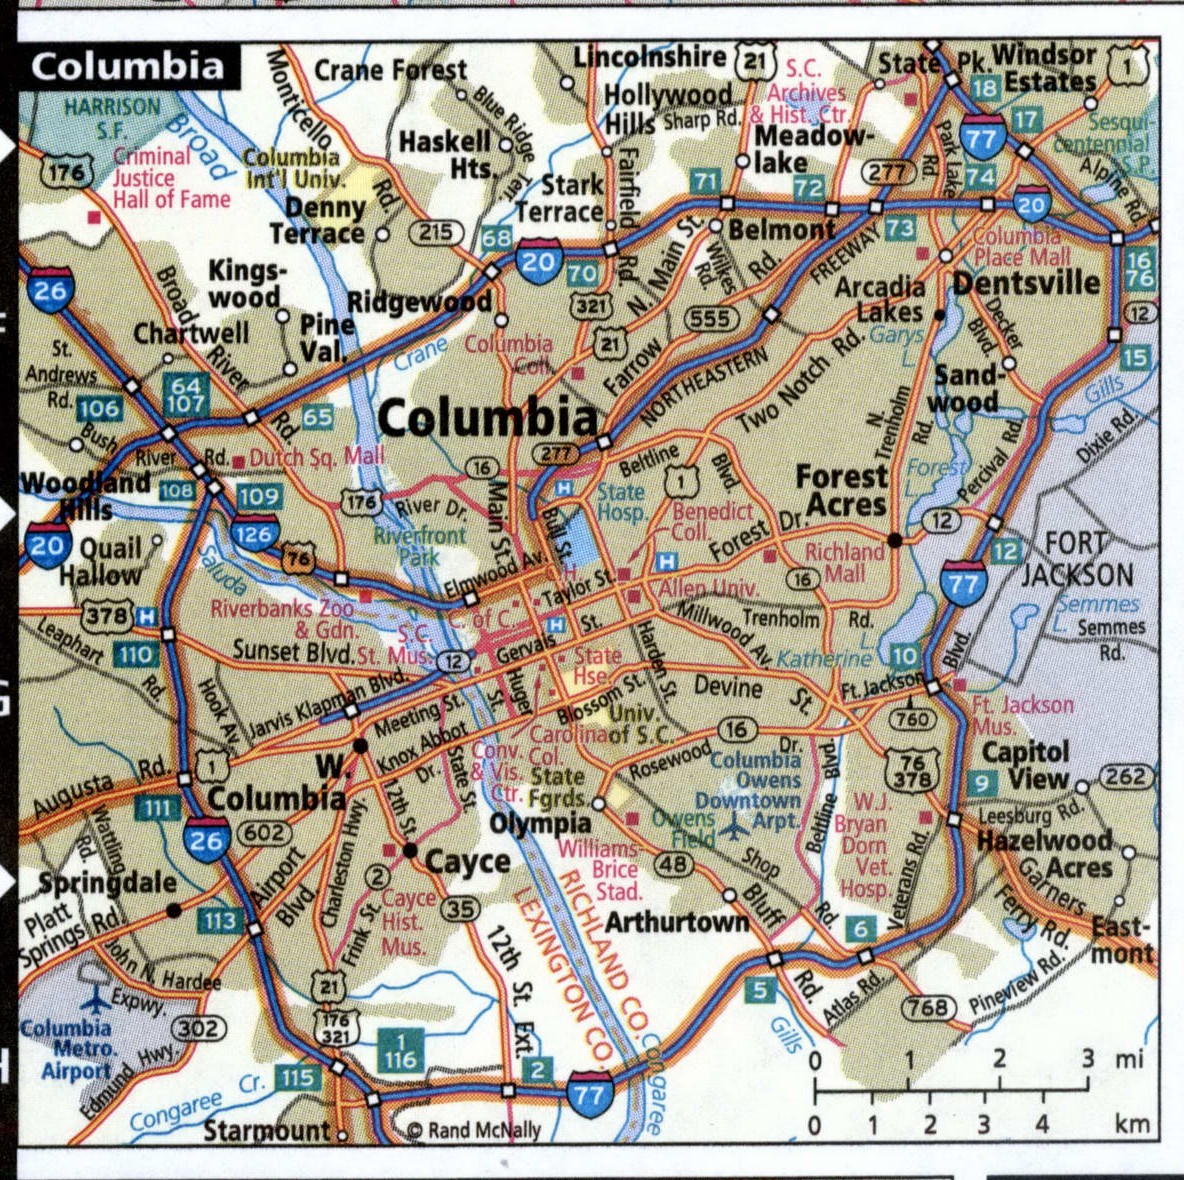 Columbia city map for truckers